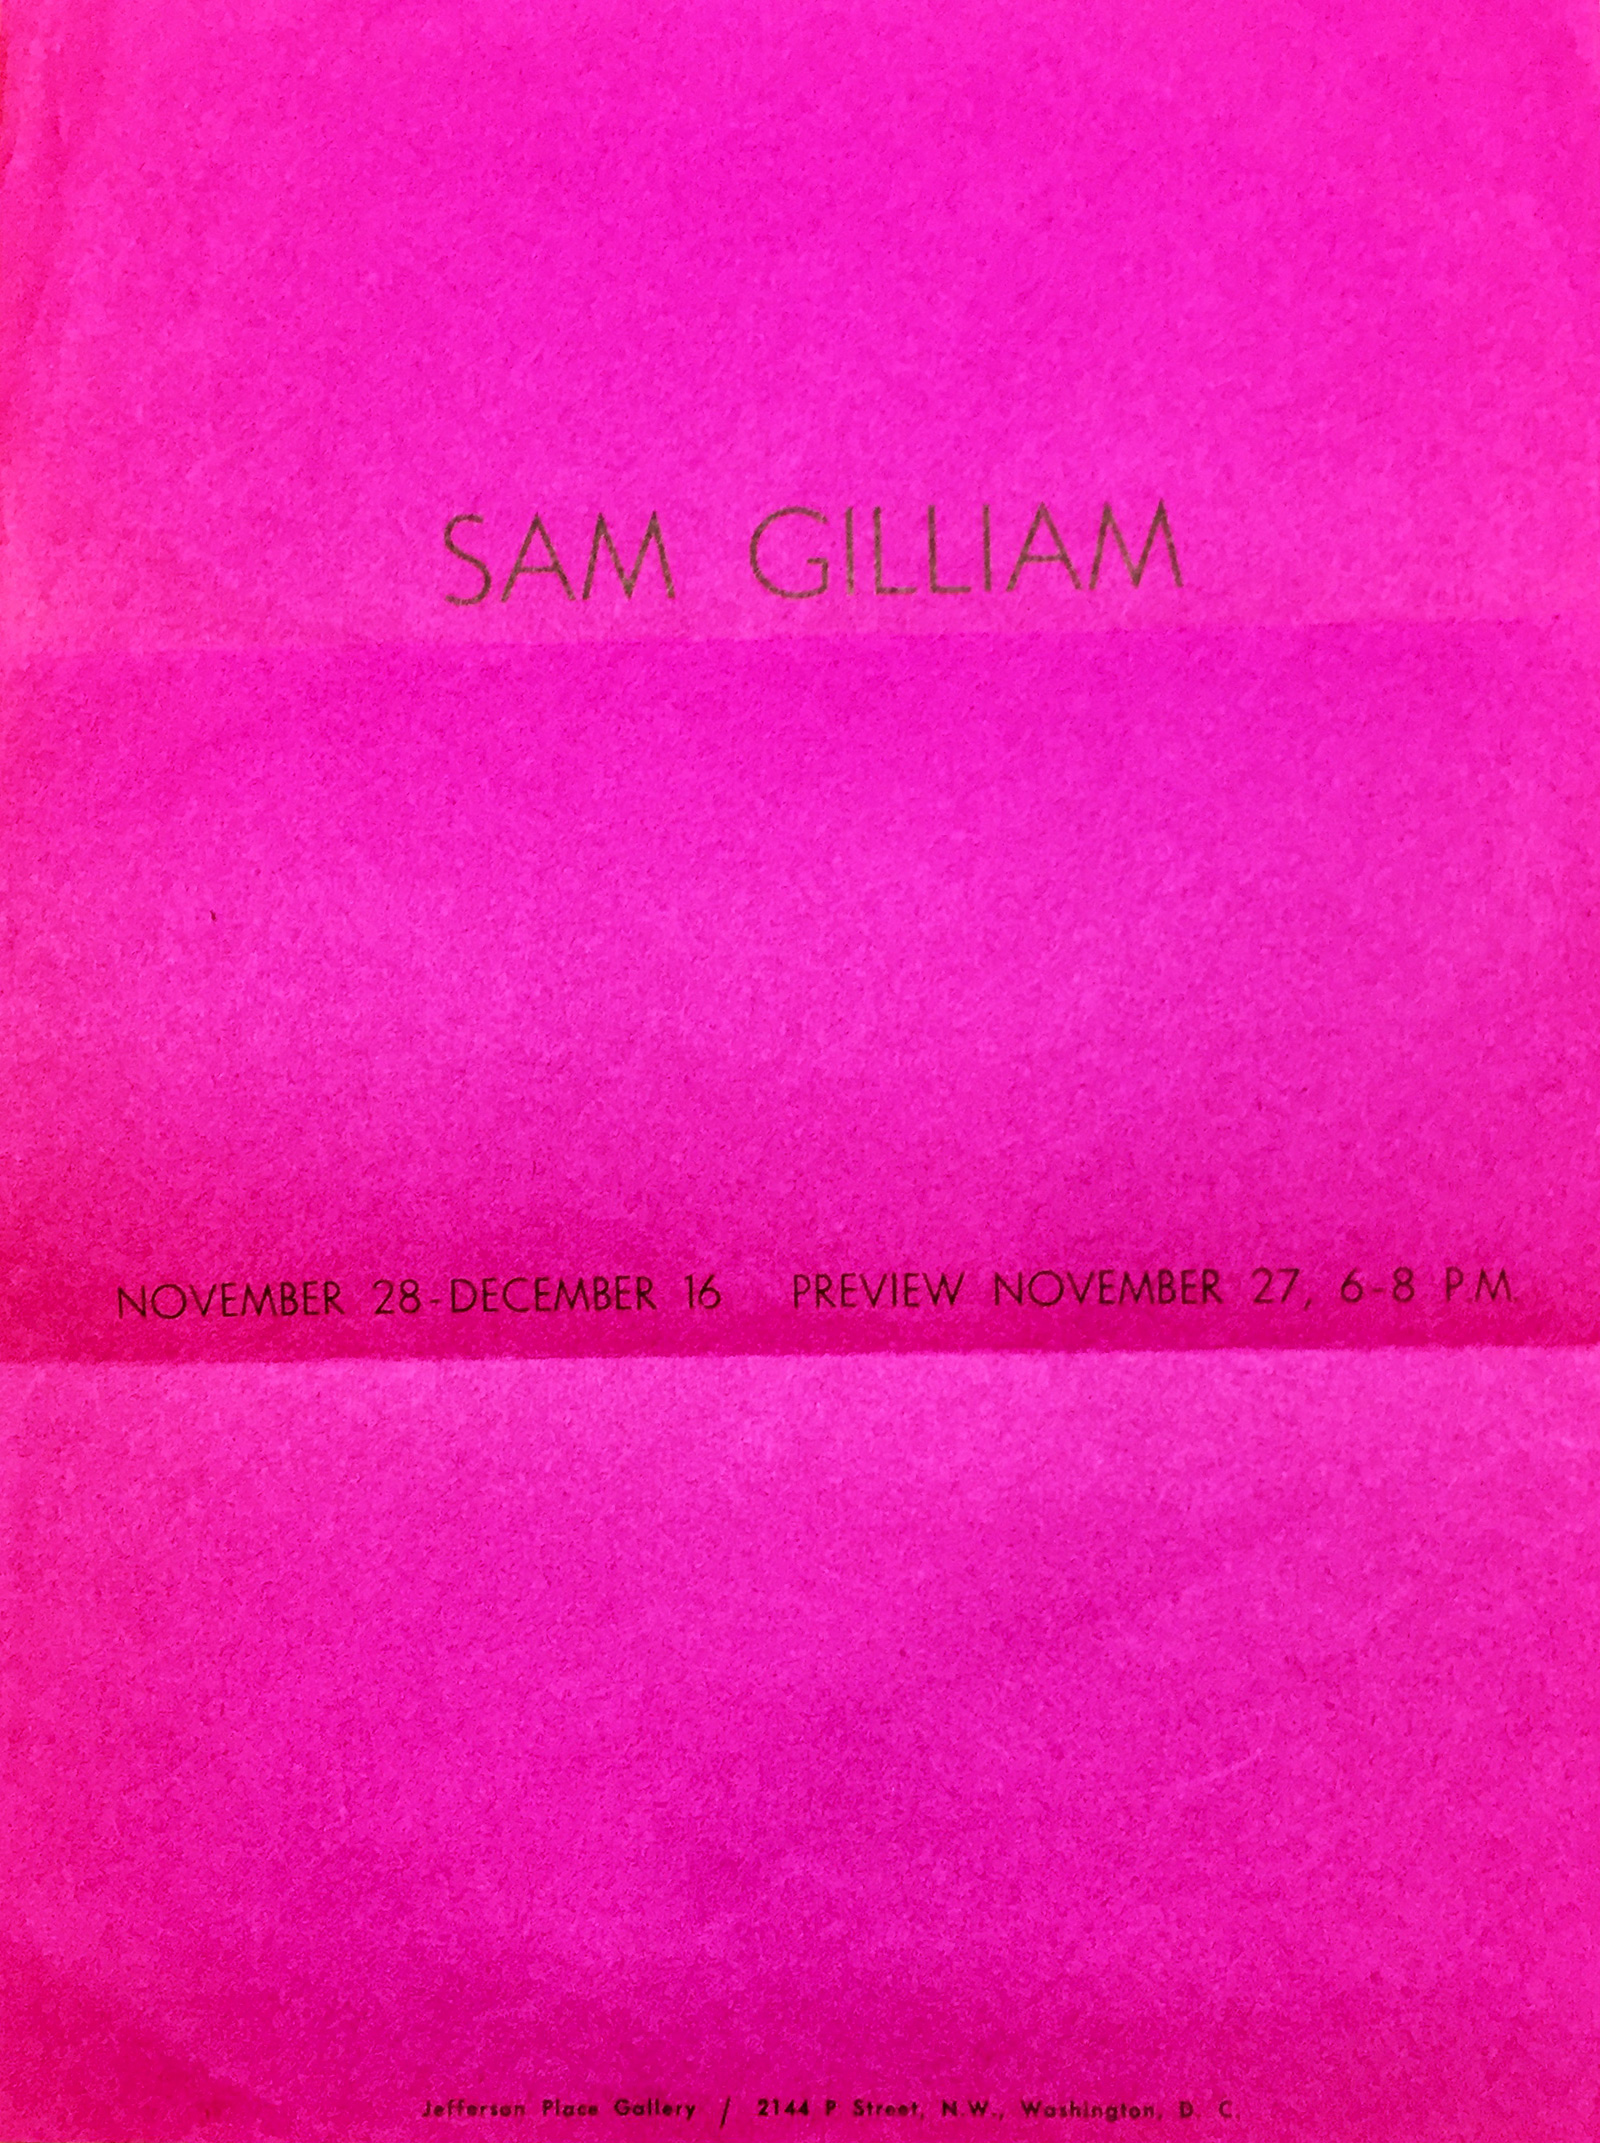 Announcement flier for Sam Gilliam at Jefferson Place Gallery